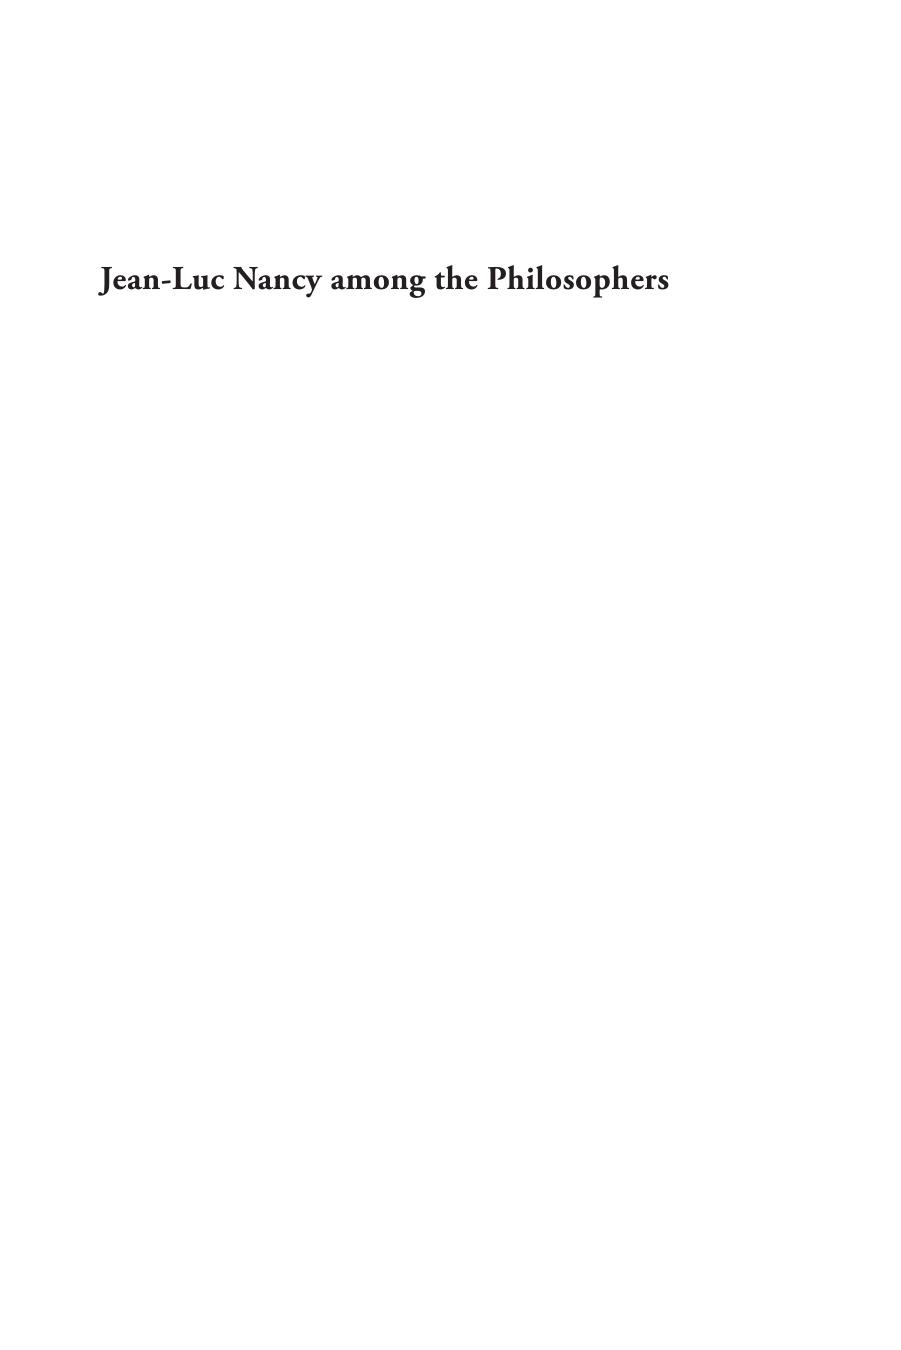 Jean-Luc Nancy among the Philosophers by Irving Goh (editor)